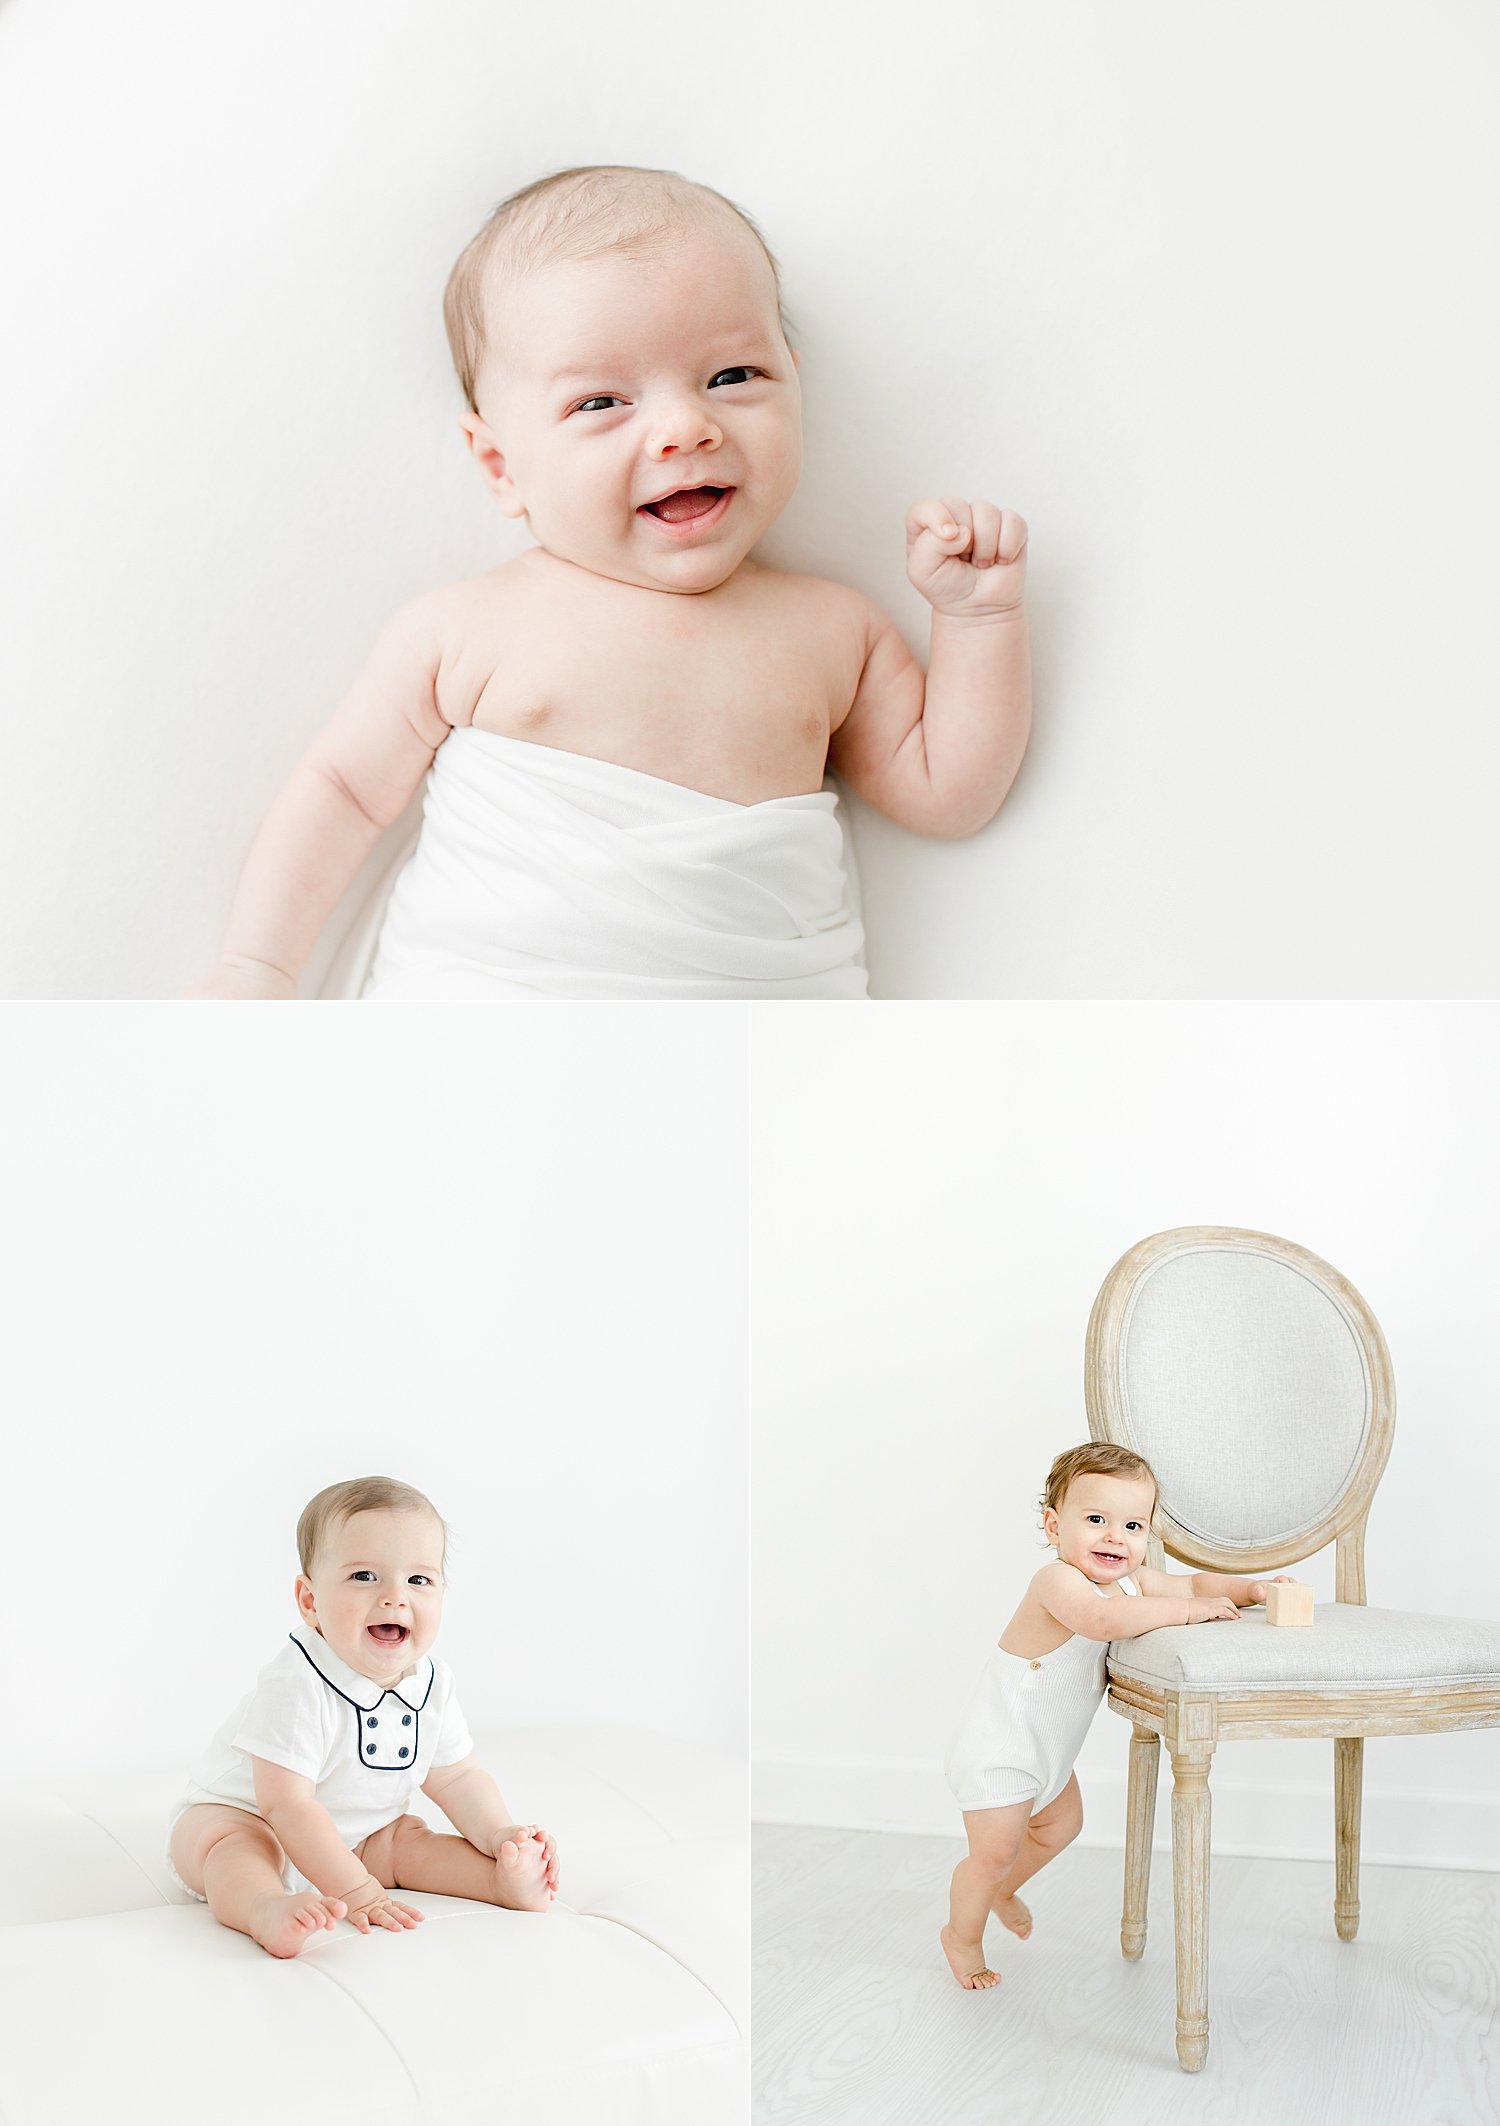 Why You Should Hire a Photographer for Your Baby's First Year| Newborn, six-month and one year photos | Kristin Wood Photography.